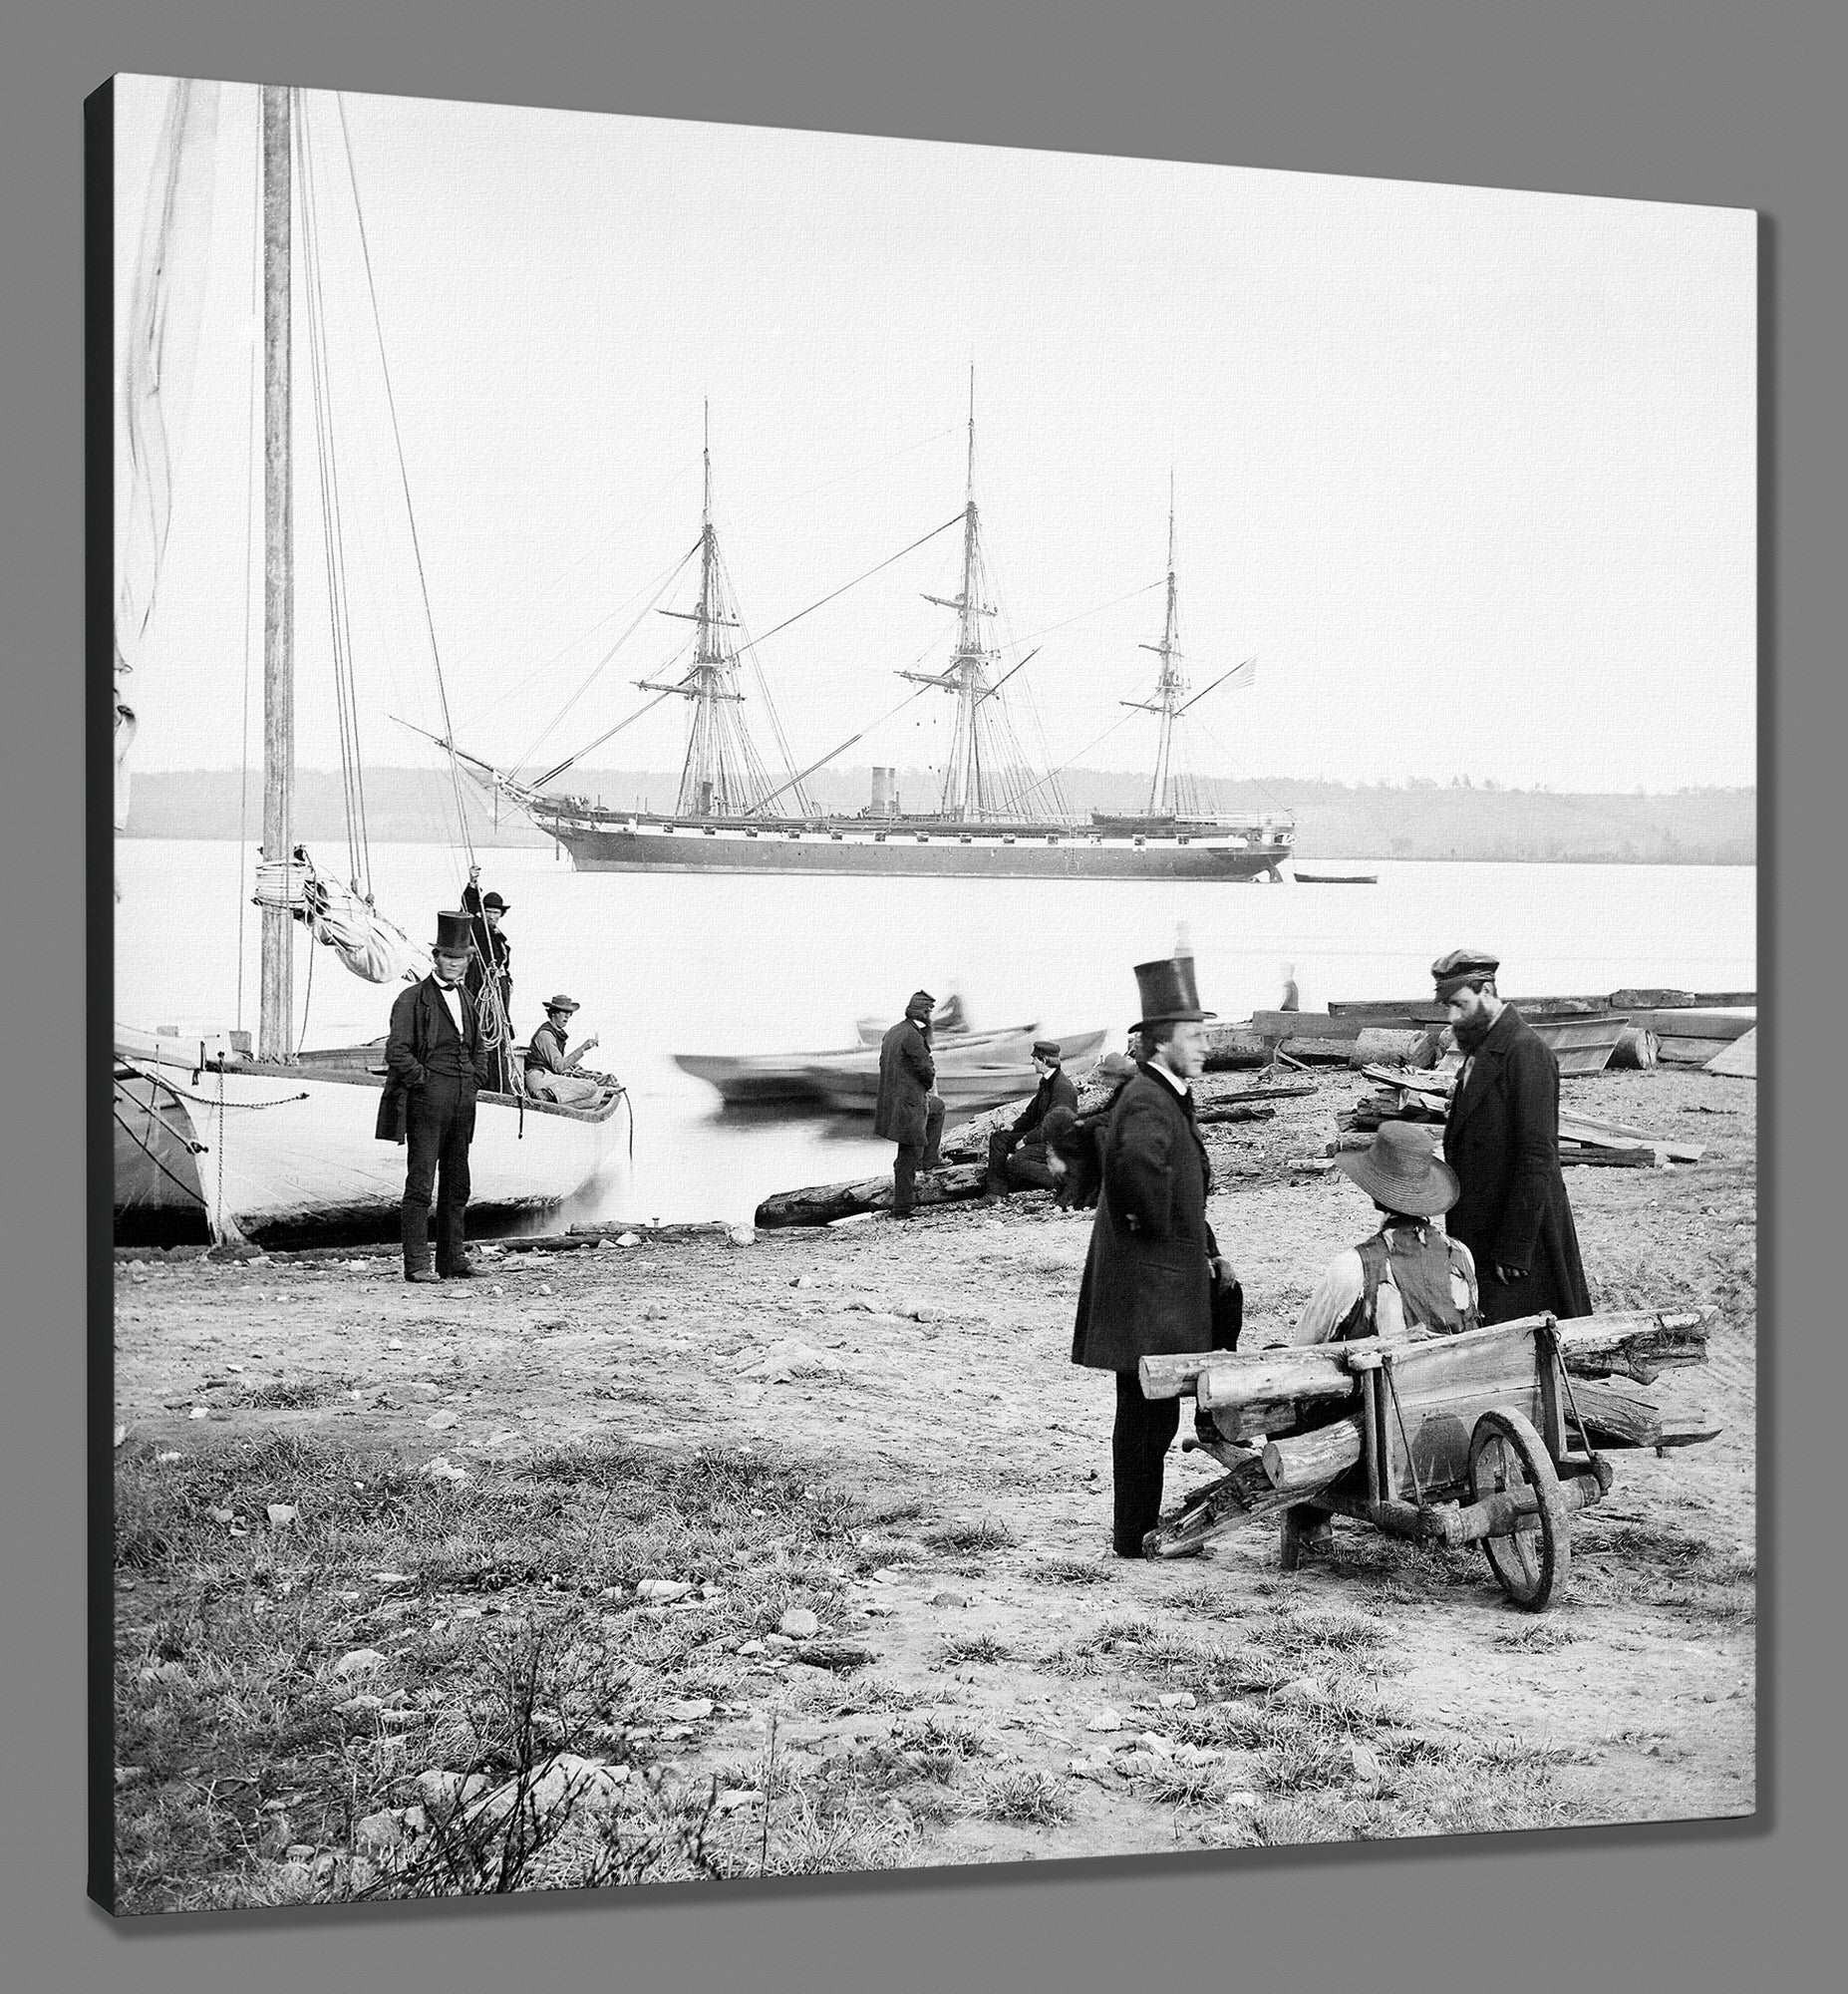 A fine art canvas print of a vintage photo of the Steam Frigate Pensacola in Alexandria